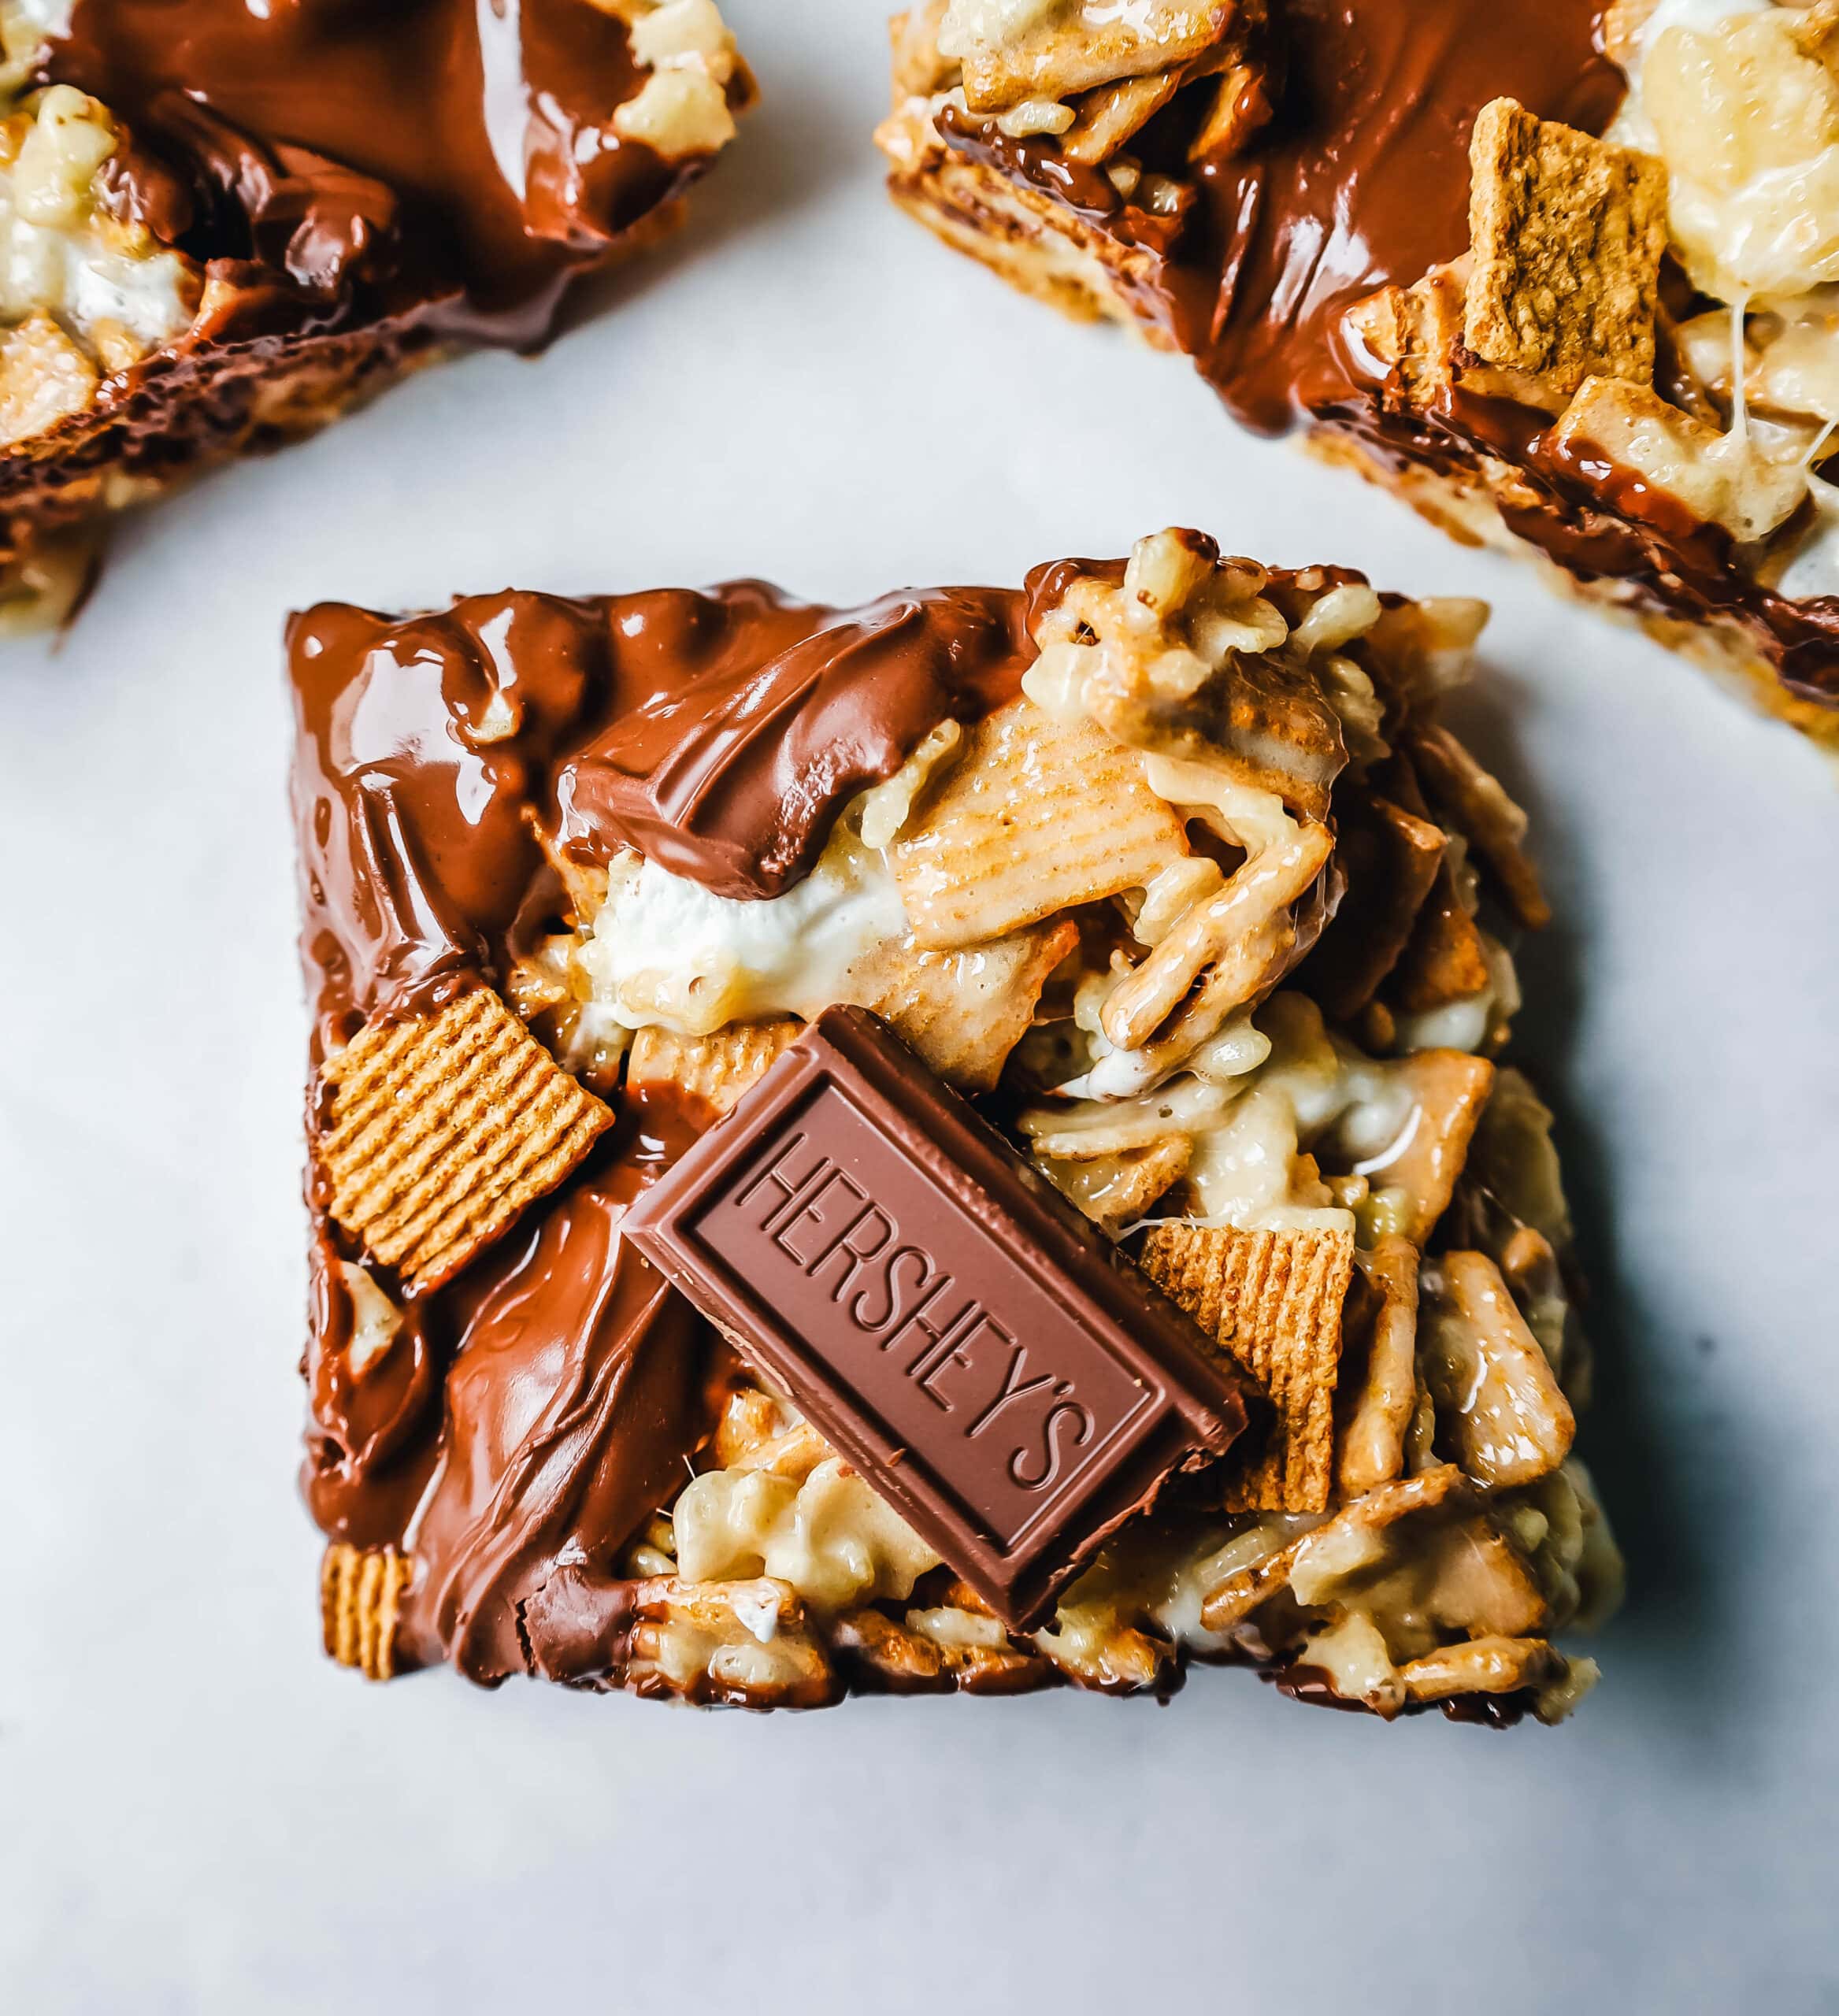 S'more Rice Krispie Treats made with Golden Graham, Rice Krispies, Marshmallows, Butter, and Hershey's Milk Chocolate Bars. The perfect S'more Rice Krispies that can be made in less than 15 minutes!